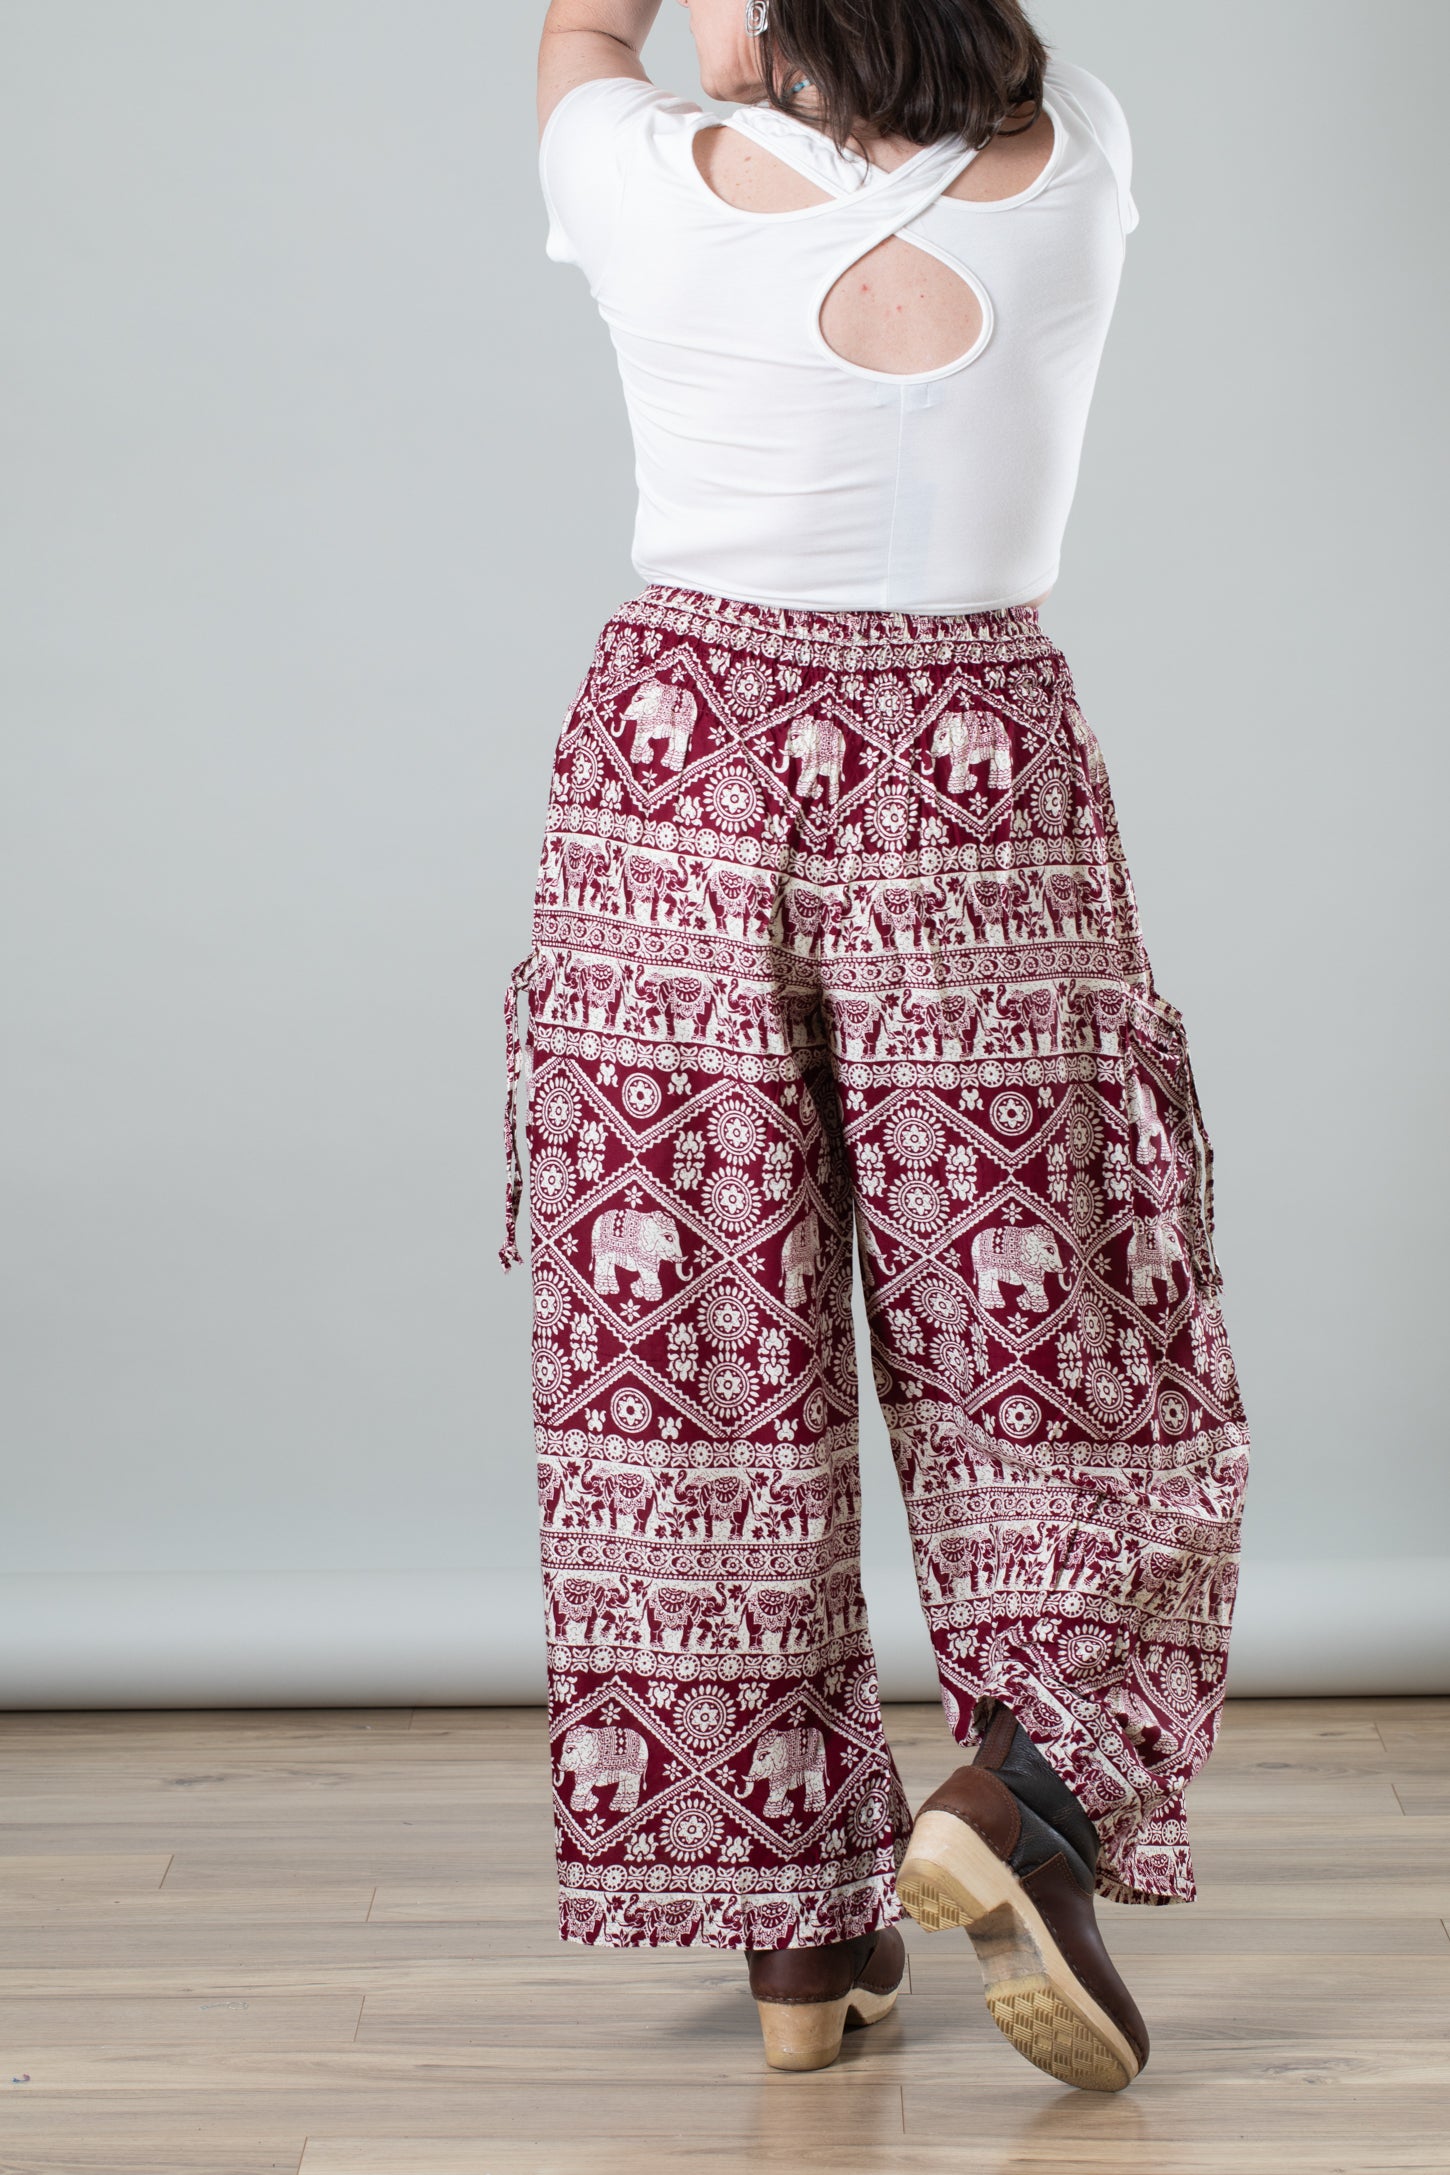 One Tribe Apparel Women's Elephant Pants from Thailand Midnight Purple  Medium at Amazon Women's Clothing store